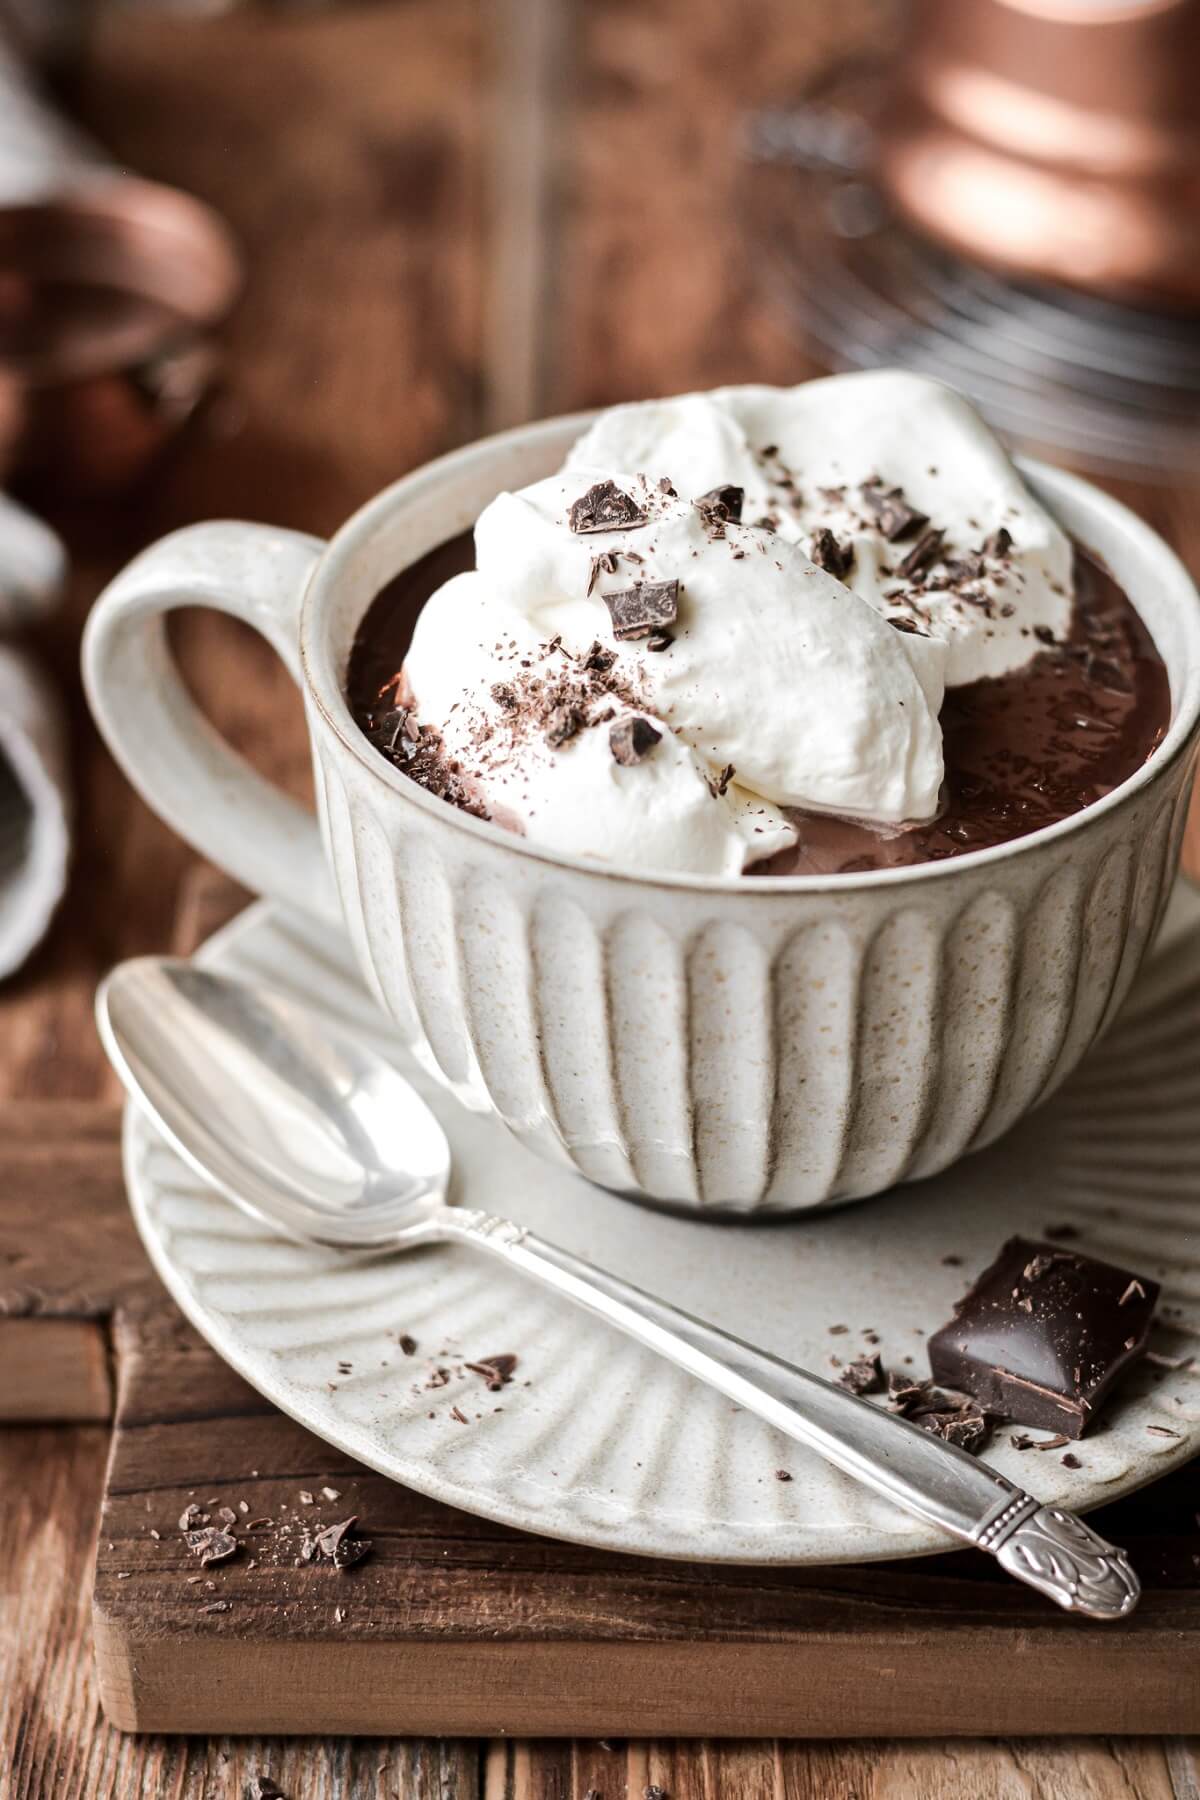 European hot chocolate topped with whipped cream.